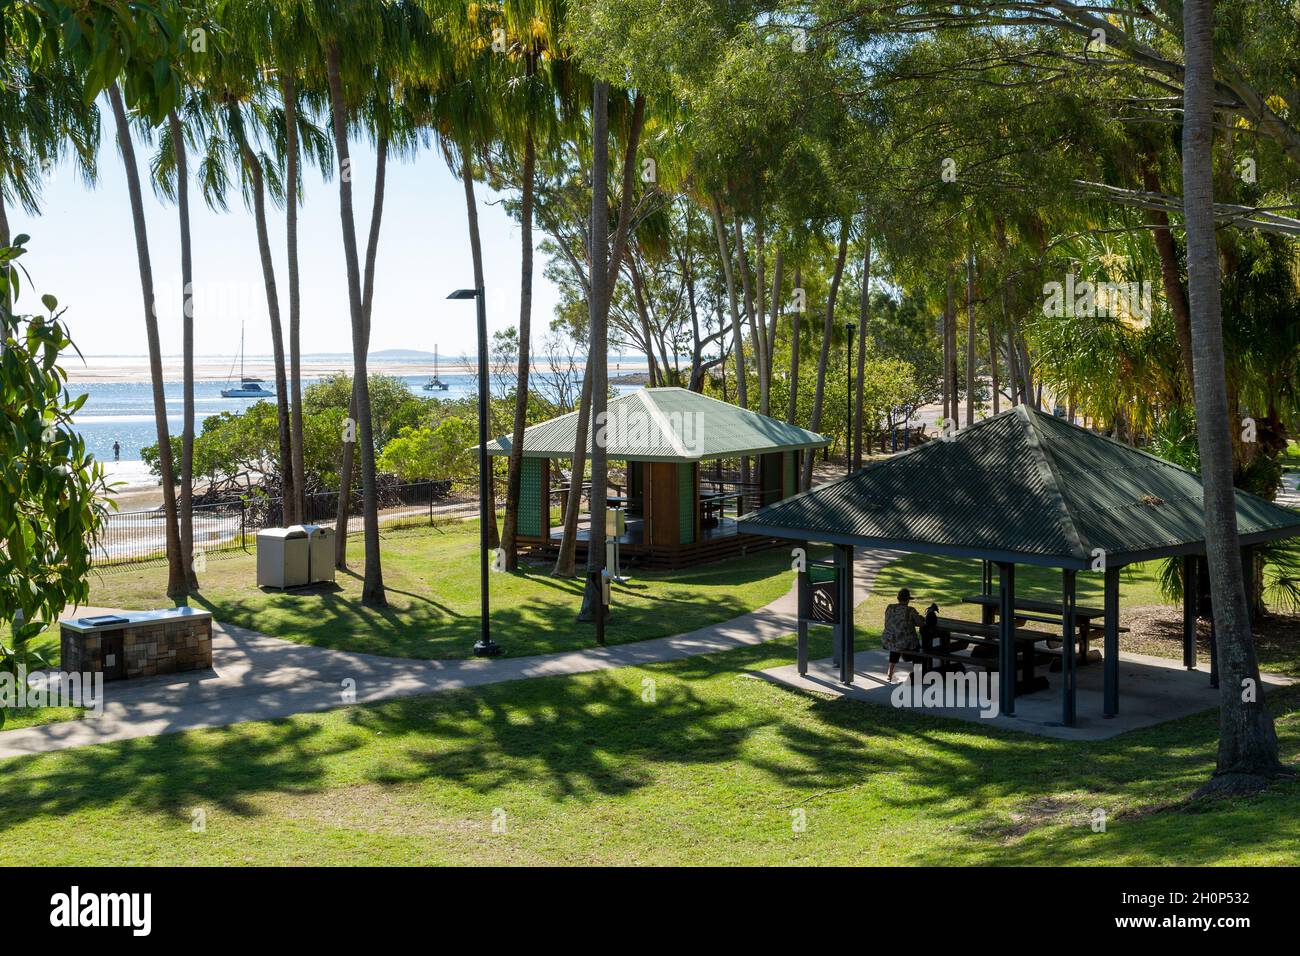 Picnic shelters under palm trees, next to an estuary. Stock Photo